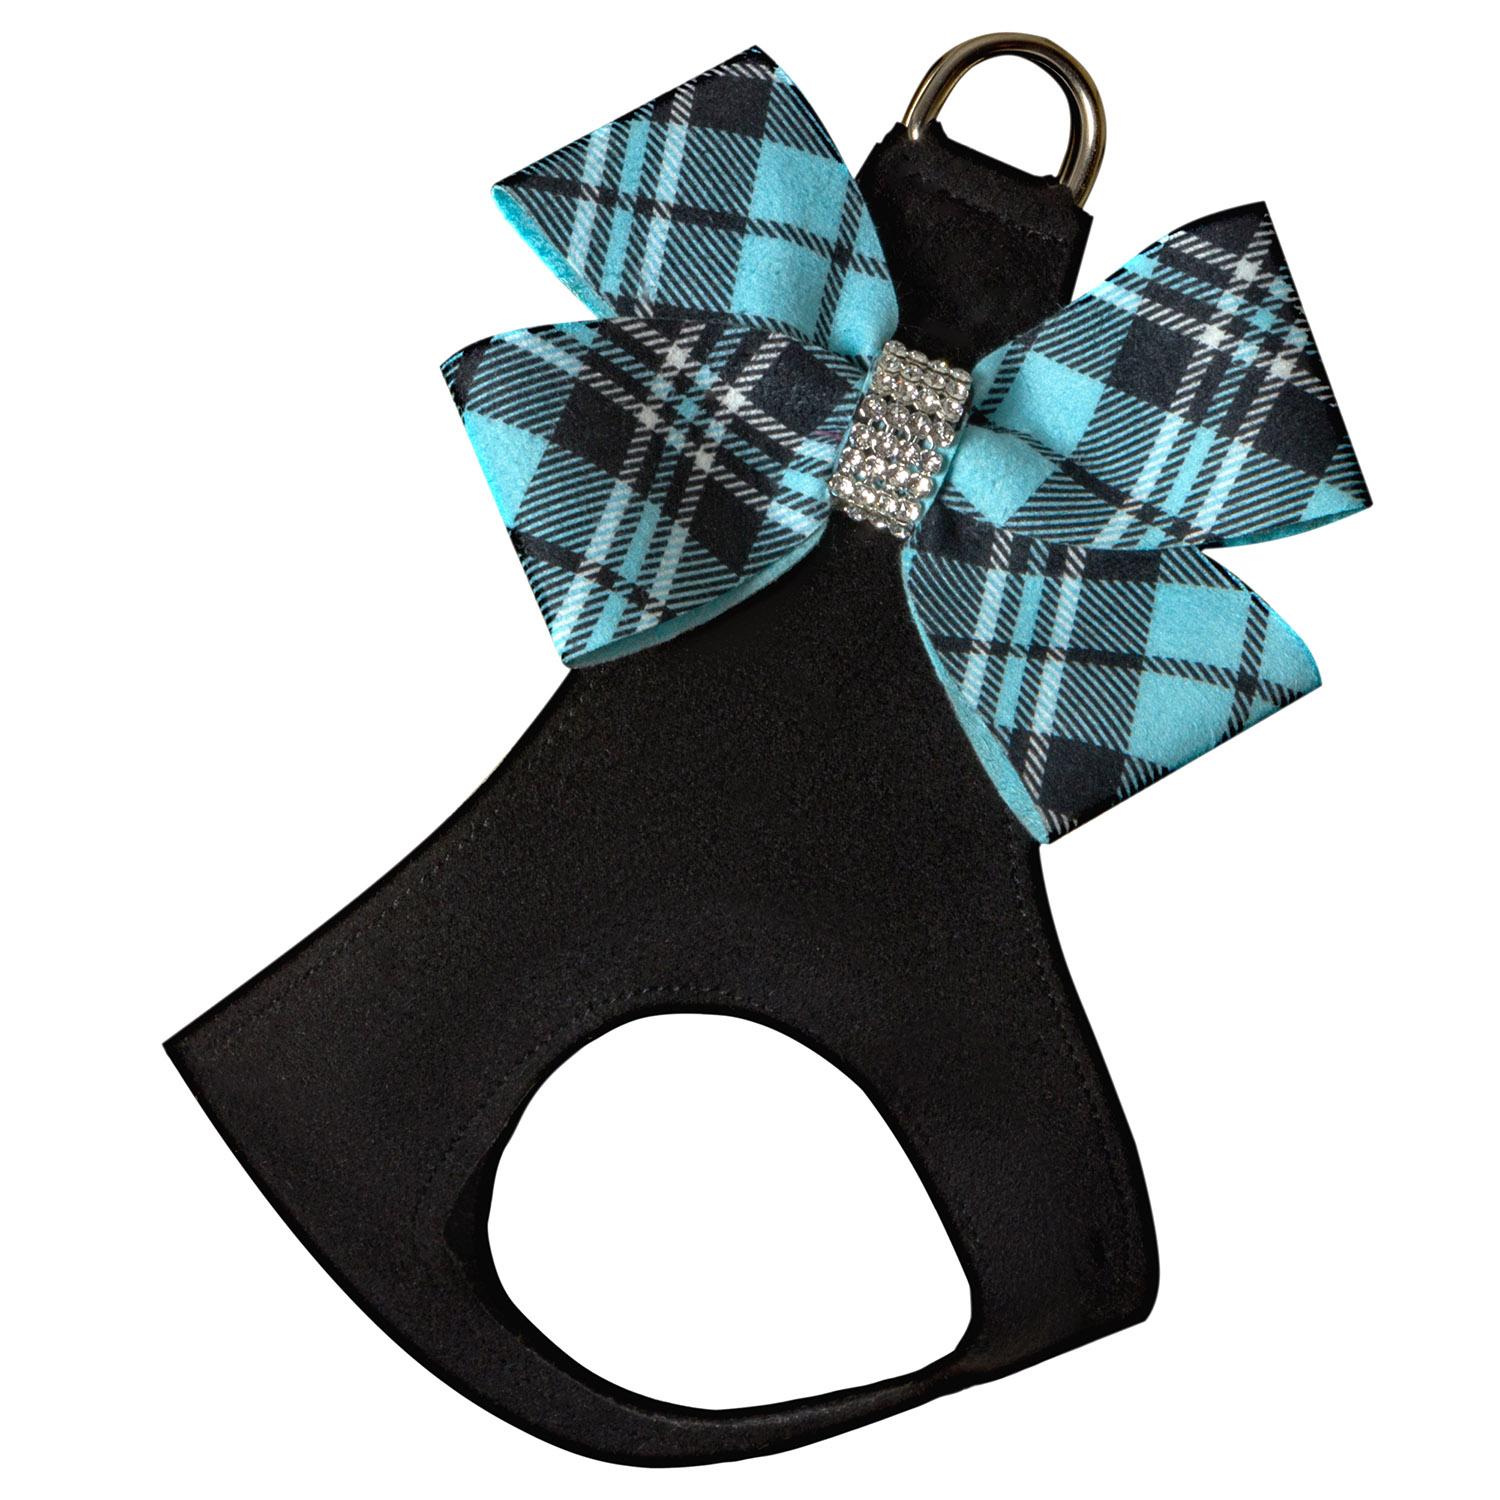 Scotty Nouveau Bow Step-In Dog Harness by Susan Lanci - Black with Tiffi Blue Plaid